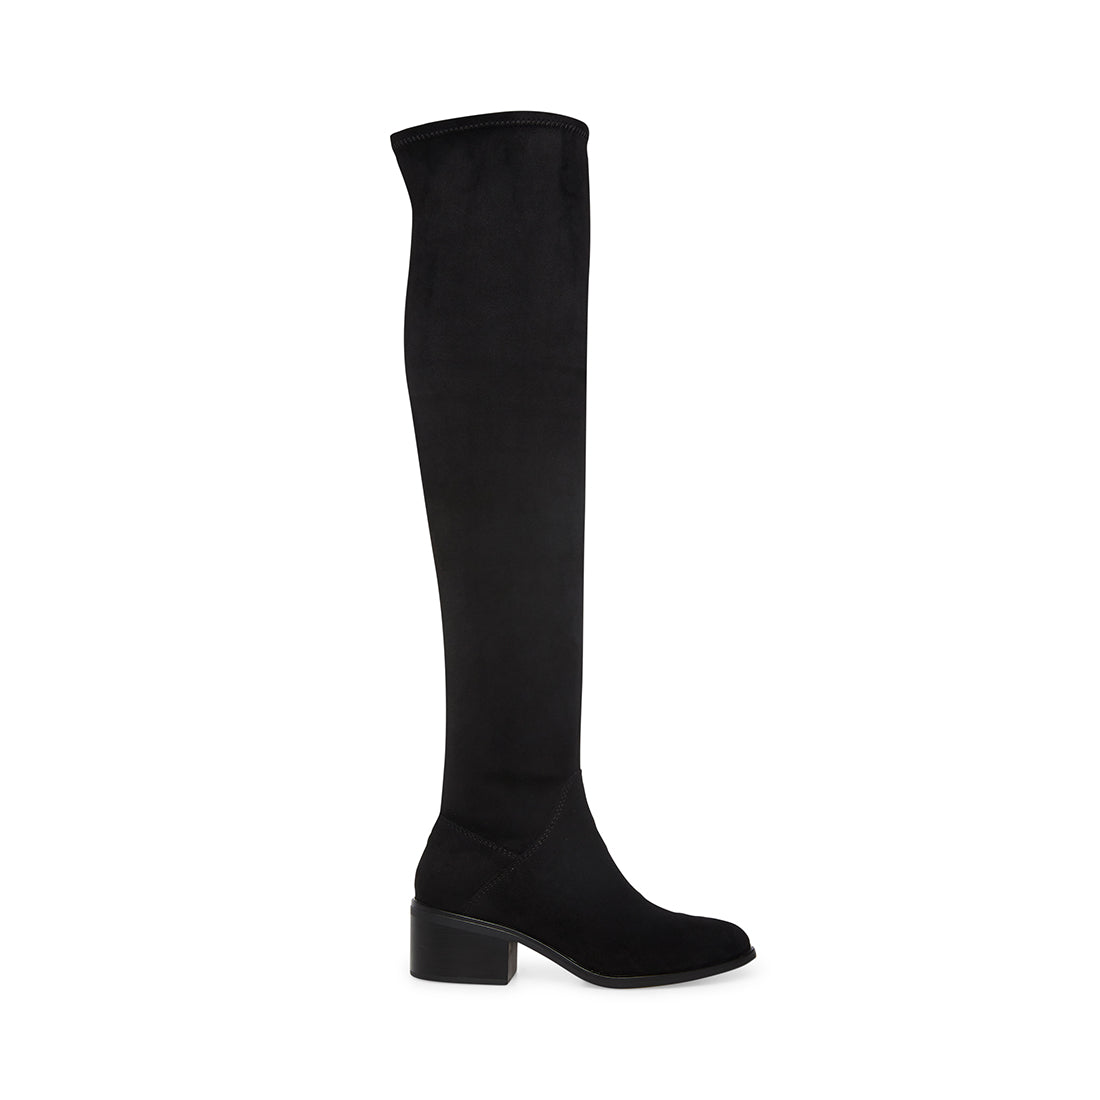 AGGIE Black Over The Knee Boots | Women's Designer Boots – Steve Madden  Canada